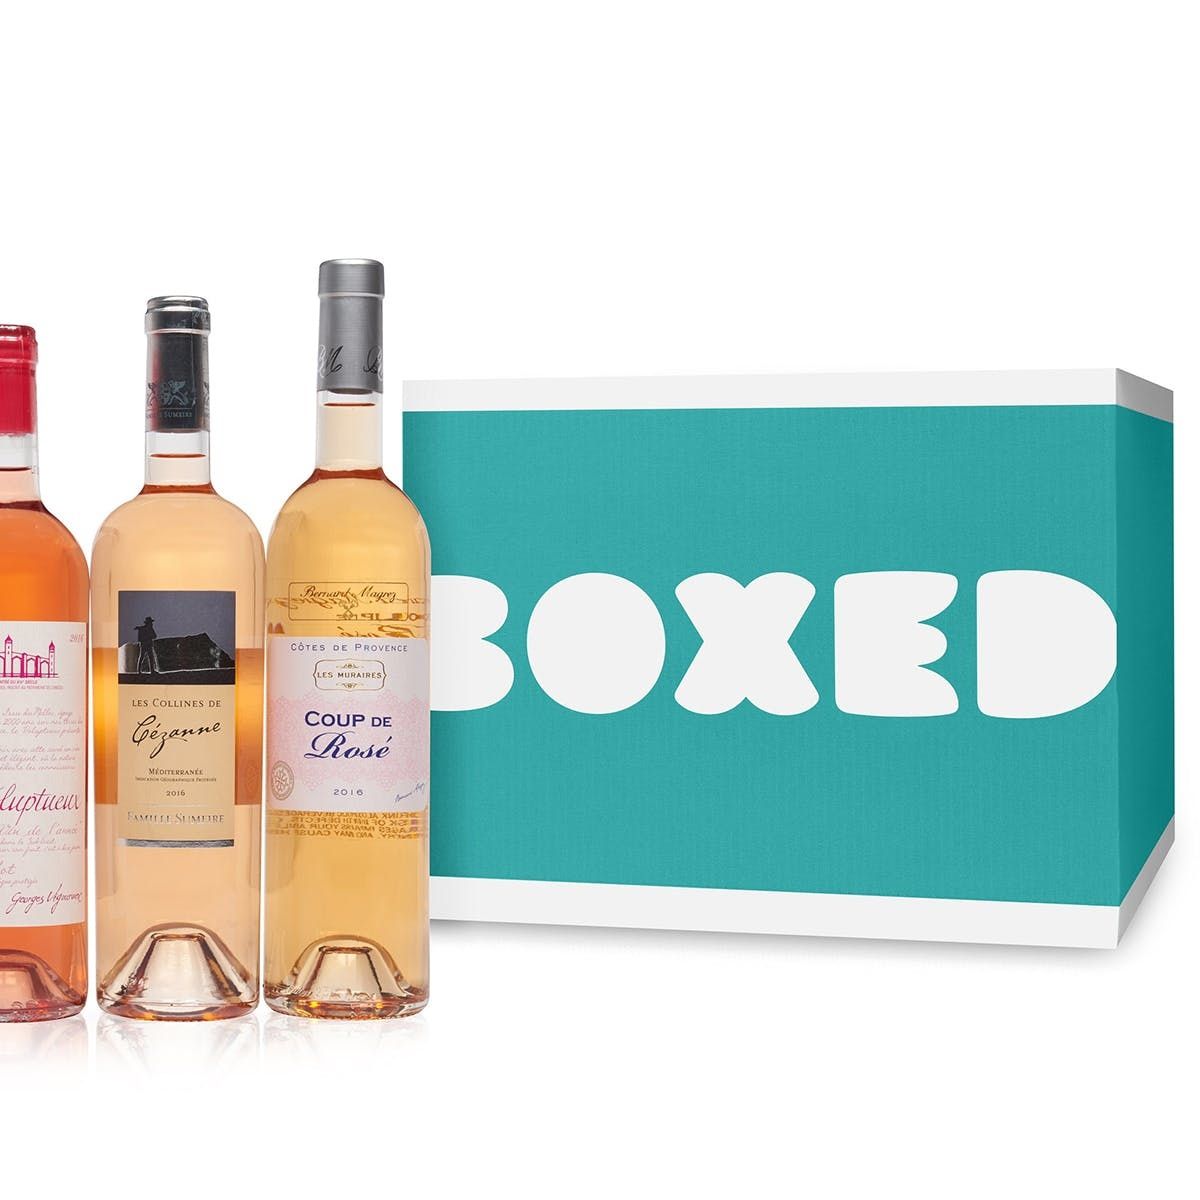 The Best Grocery Items You Didn’t Know You Could Find at Boxed